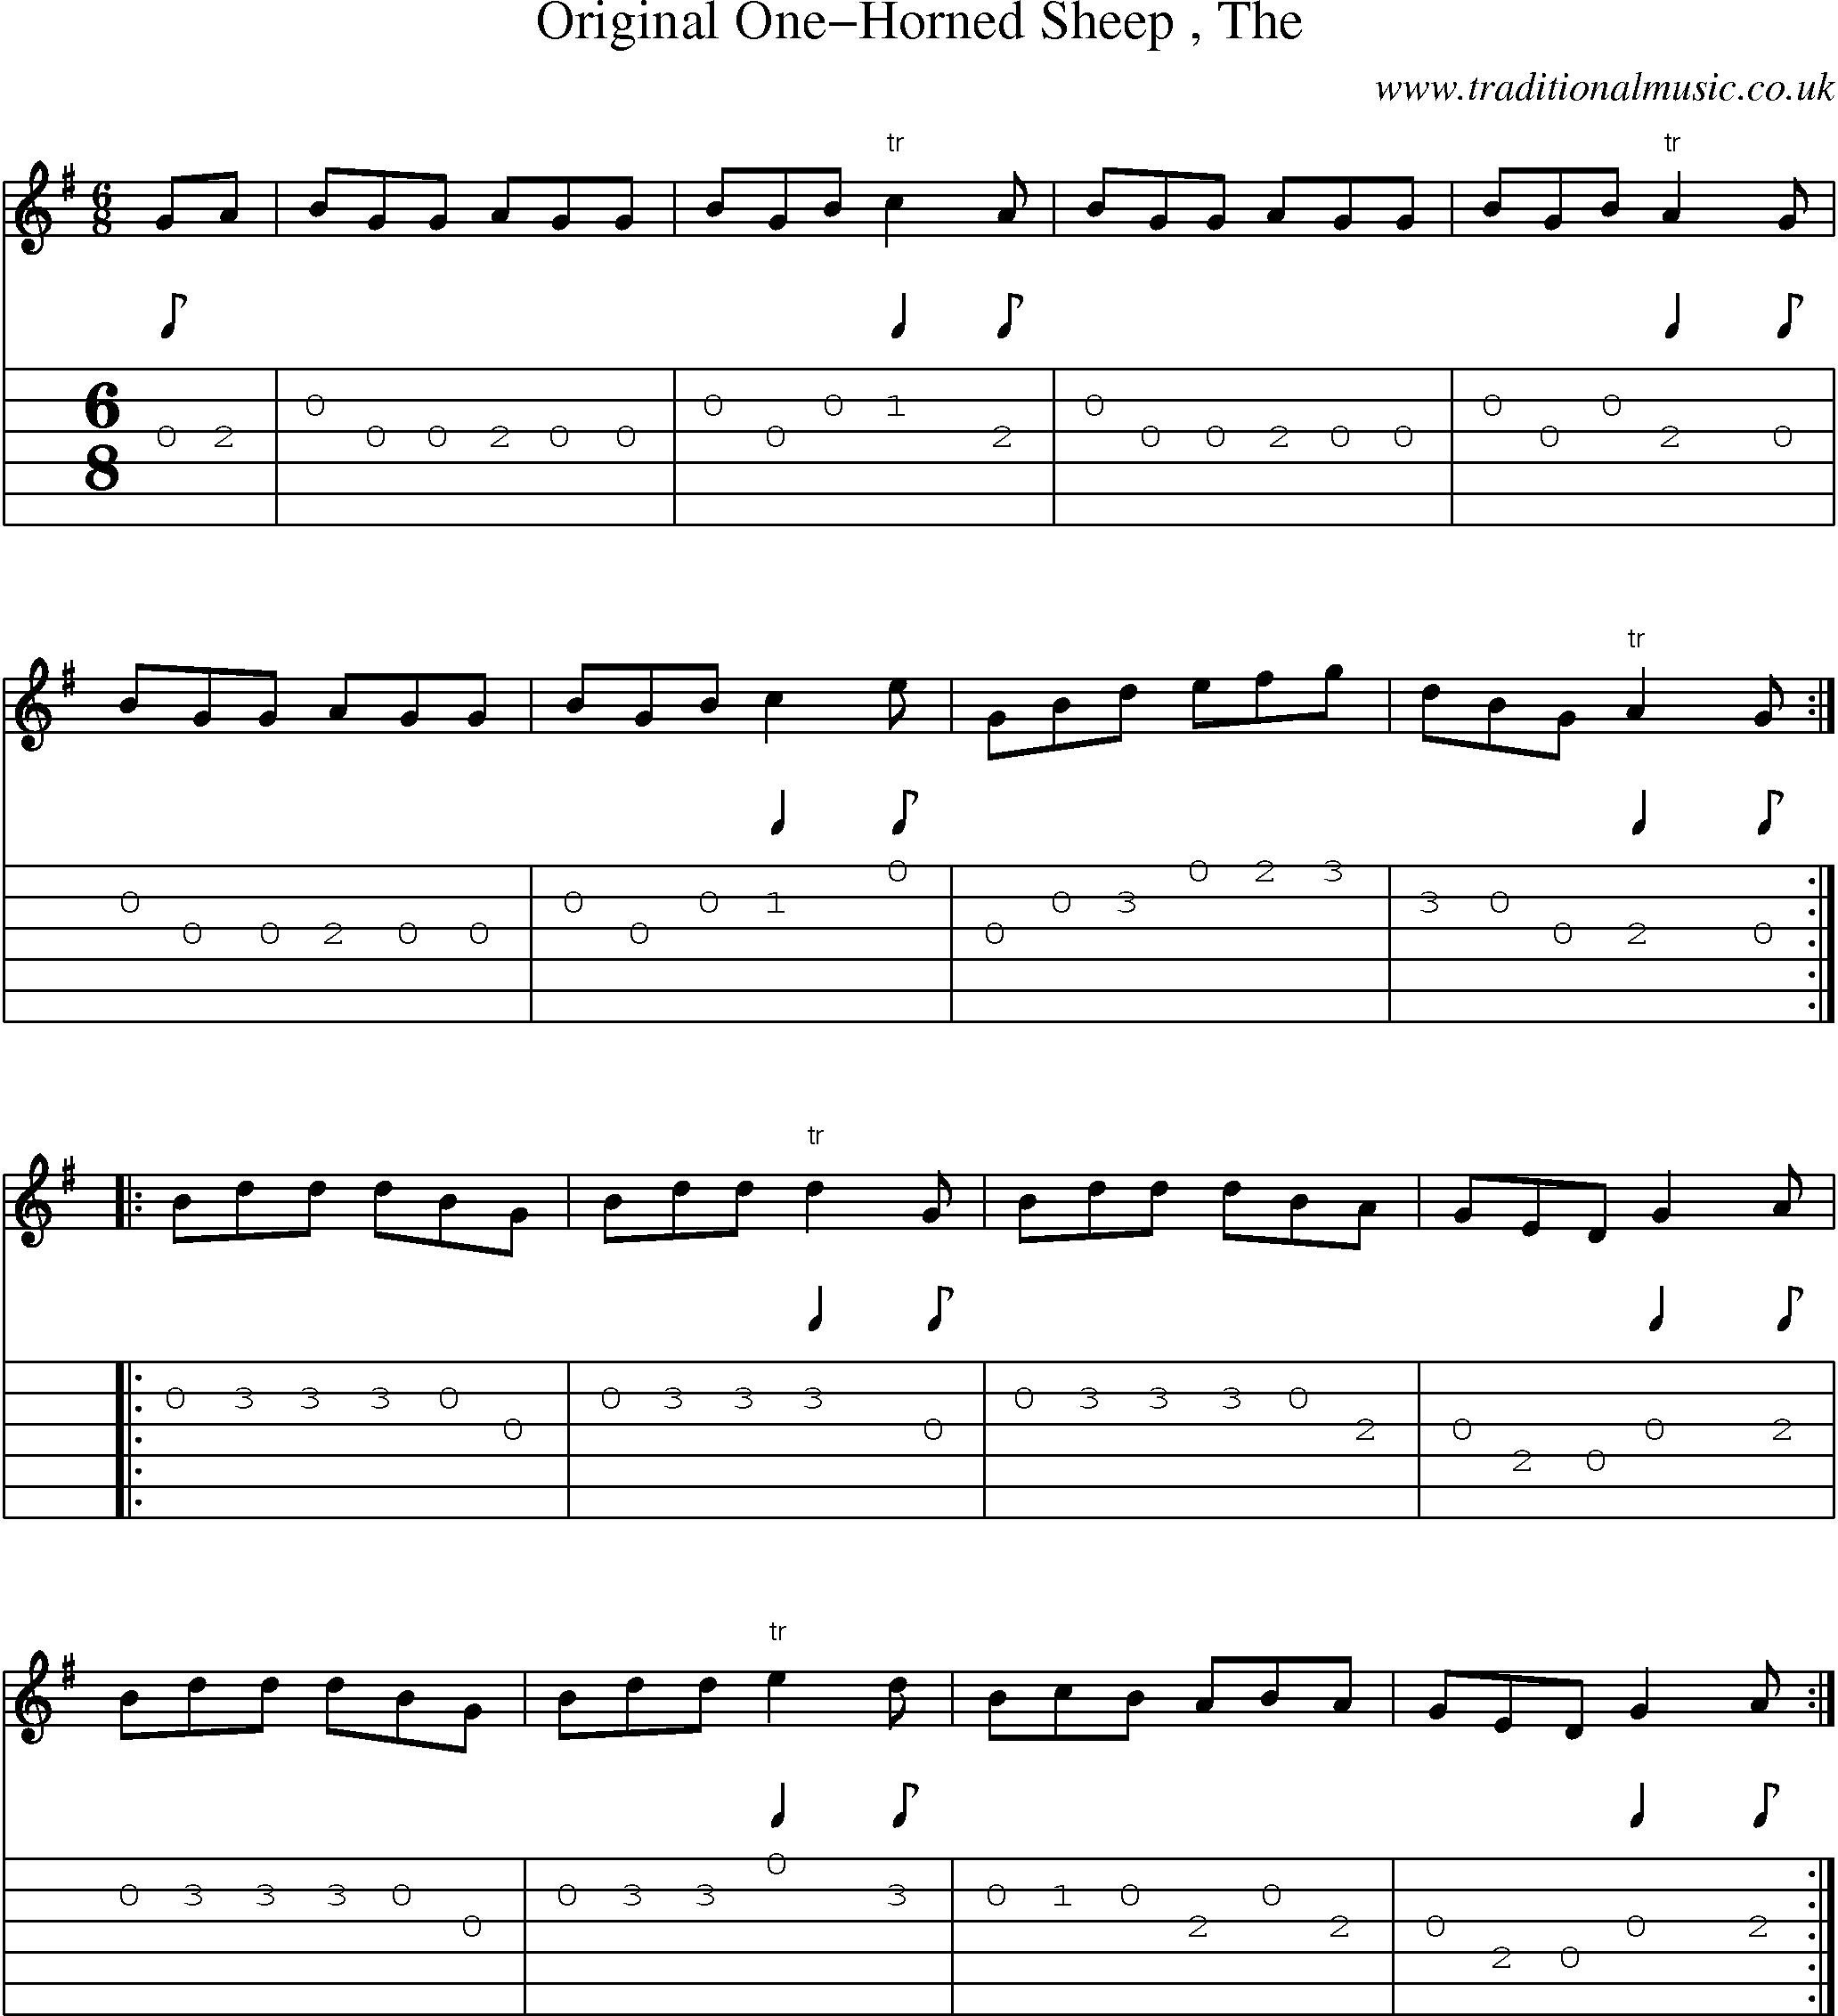 Music Score and Guitar Tabs for Original Onehorned Sheep